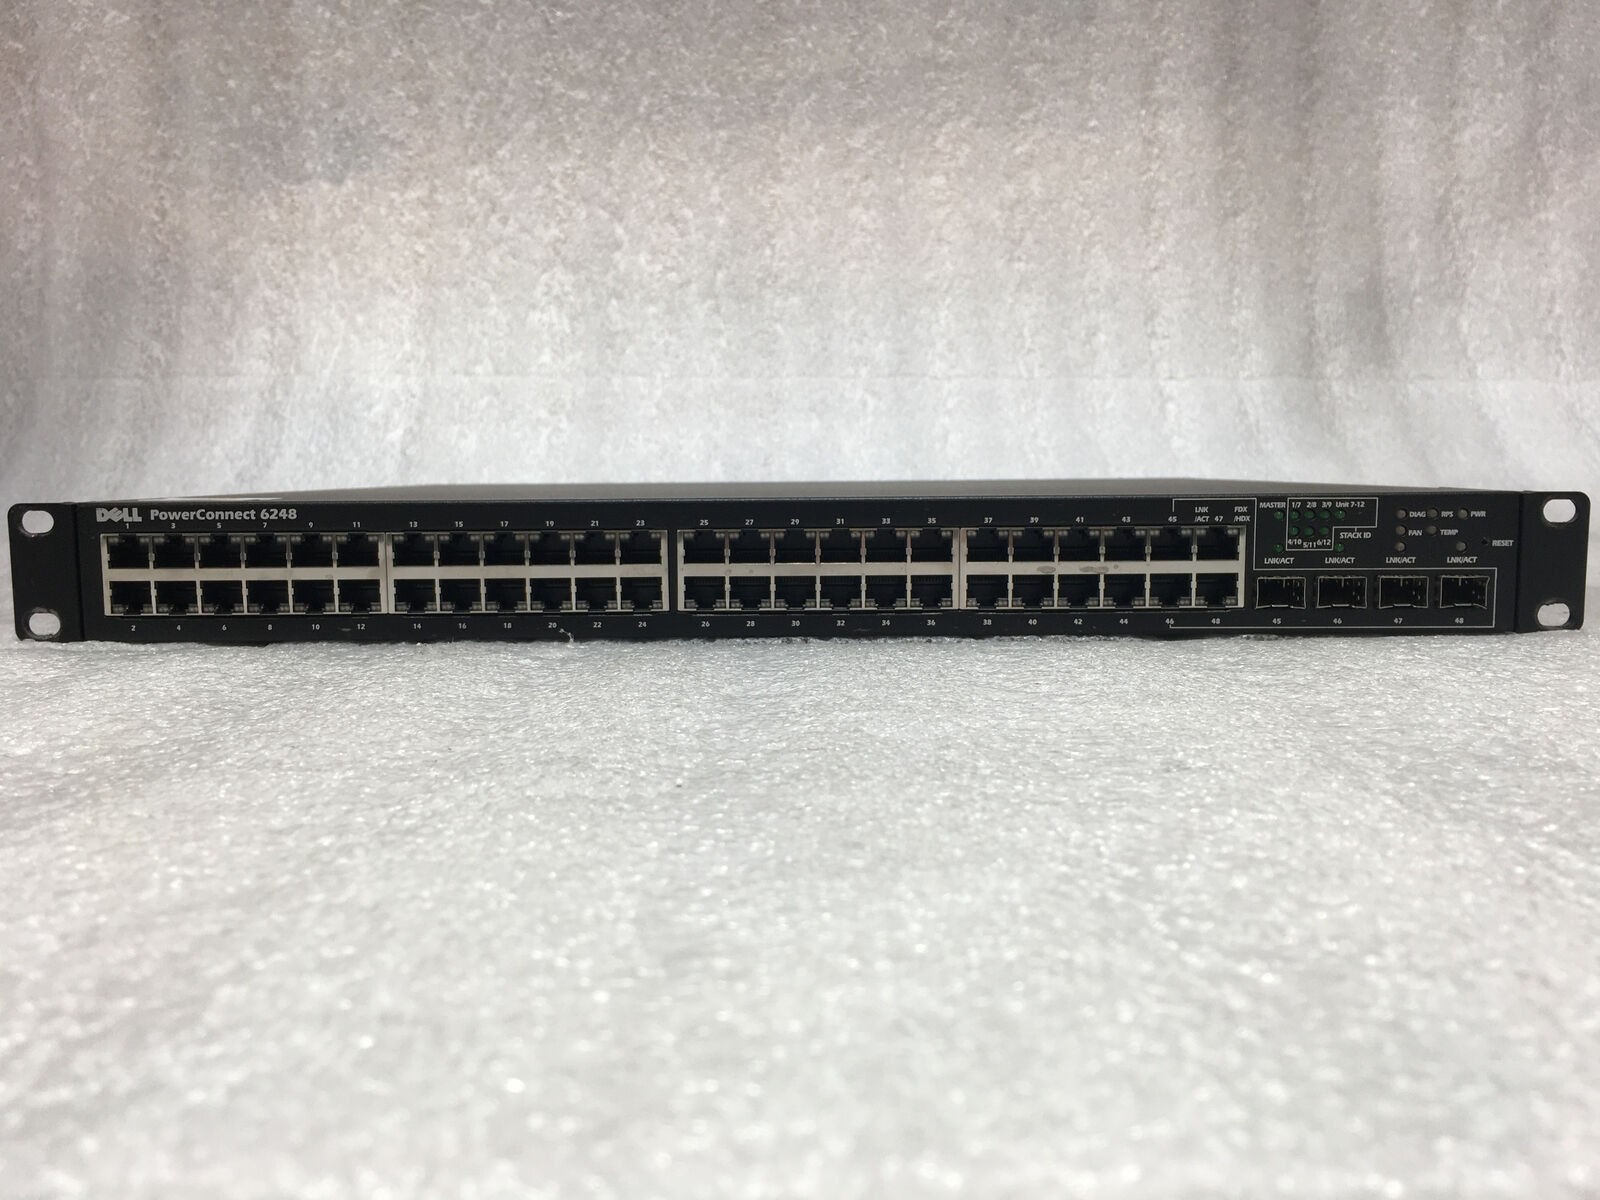 Dell PowerConnect 6248 48 Port Gigabit Ethernet Network Switch Managed, Reset